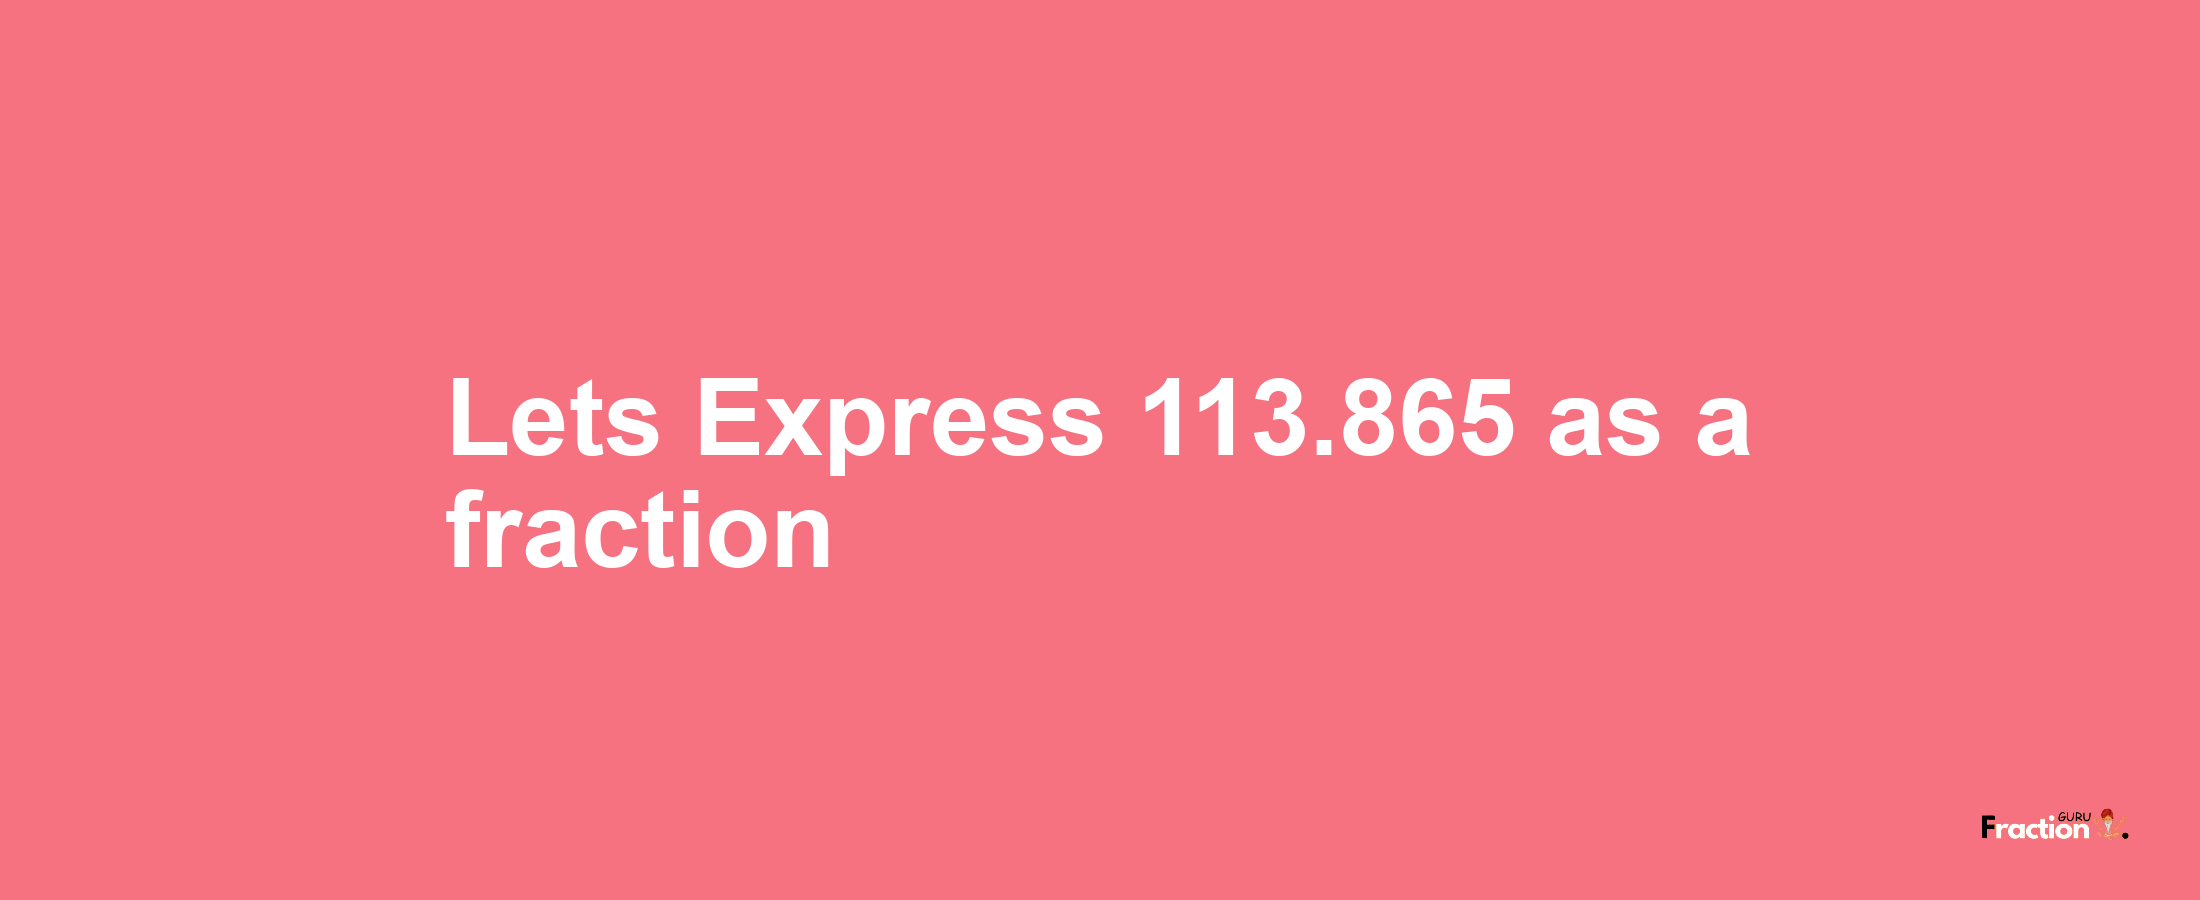 Lets Express 113.865 as afraction